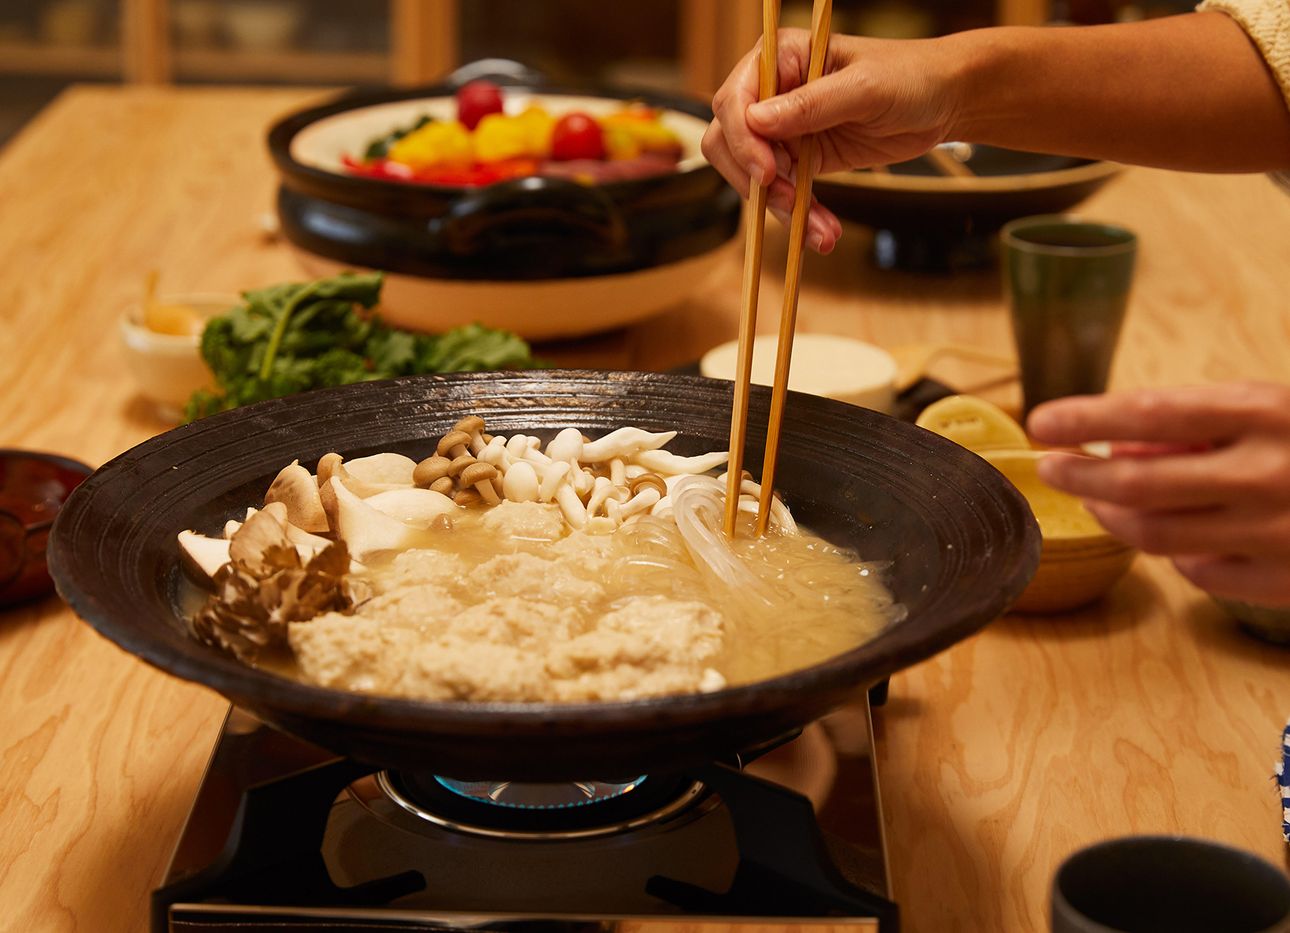 A donabe pot on a burner with mushrooms, noodles, and other ingredients in the background.